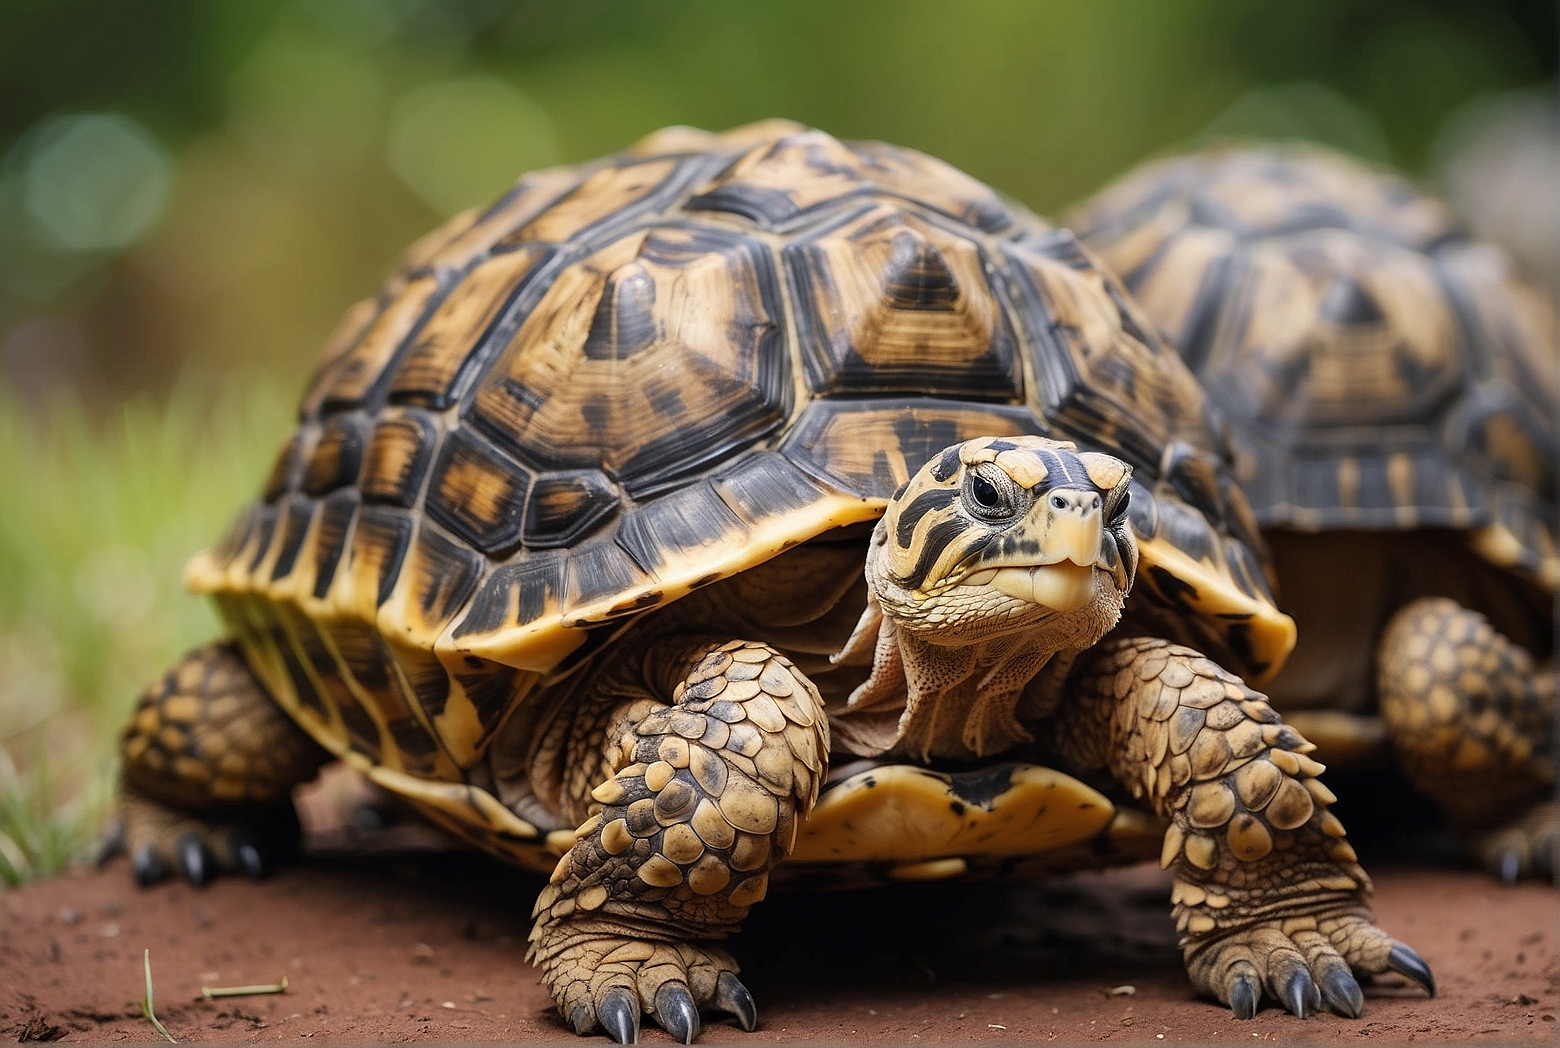 How to determine the proper feeding amount for a Russian tortoise